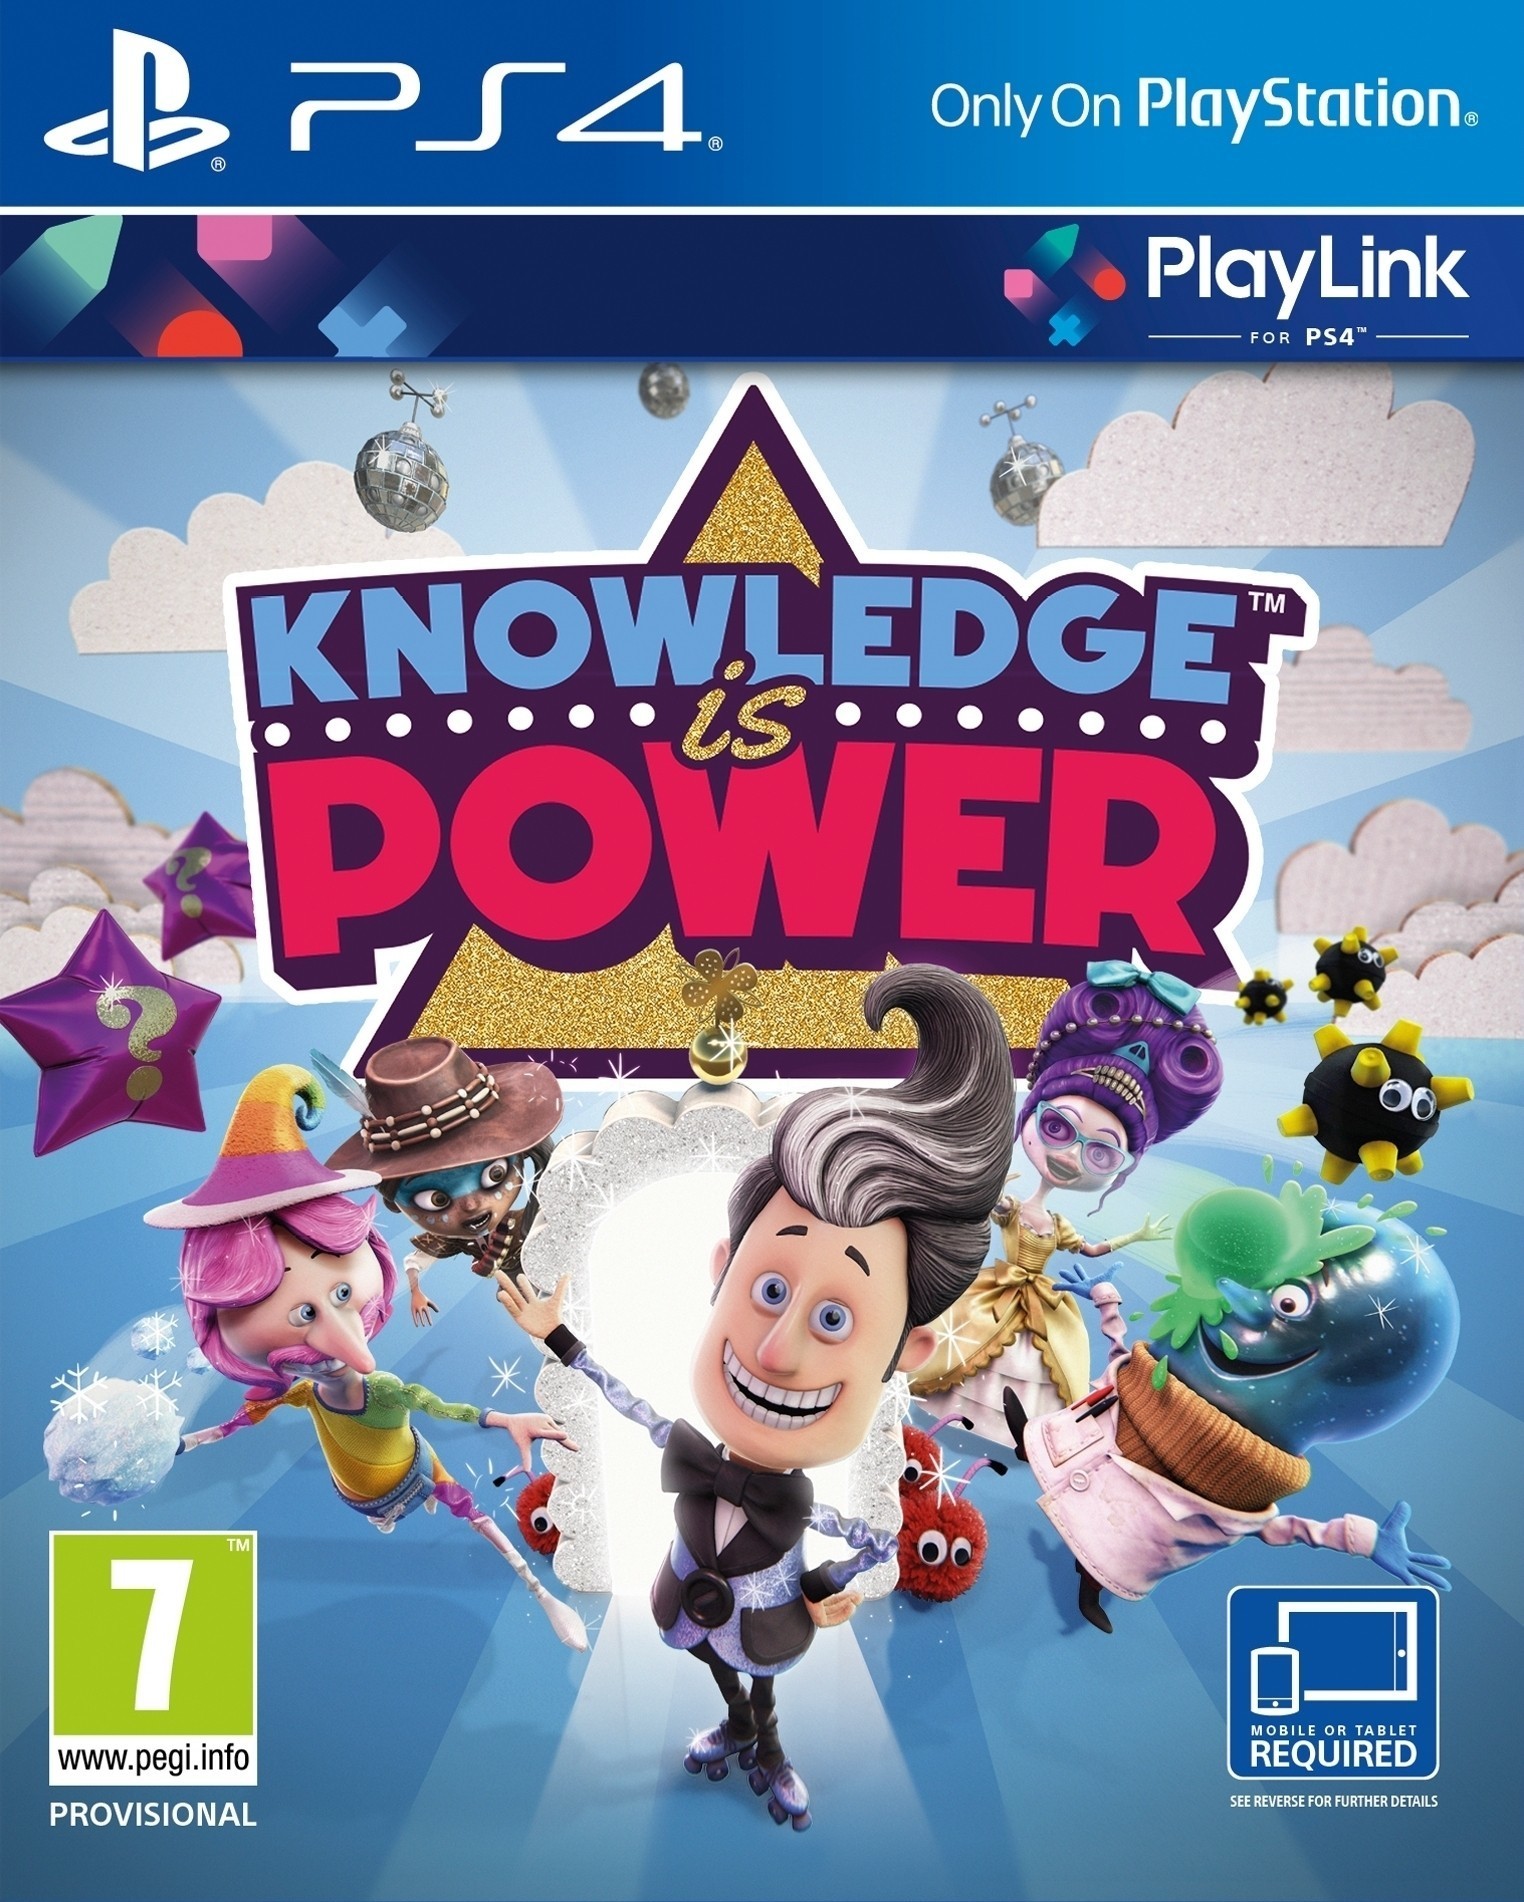 Knowledge is Power | Знание – сила [PS4 Exclusive PlayLink] 5.05 / 6.72 / 7.02 [EUR] (2017) [Русский] (v1.01)